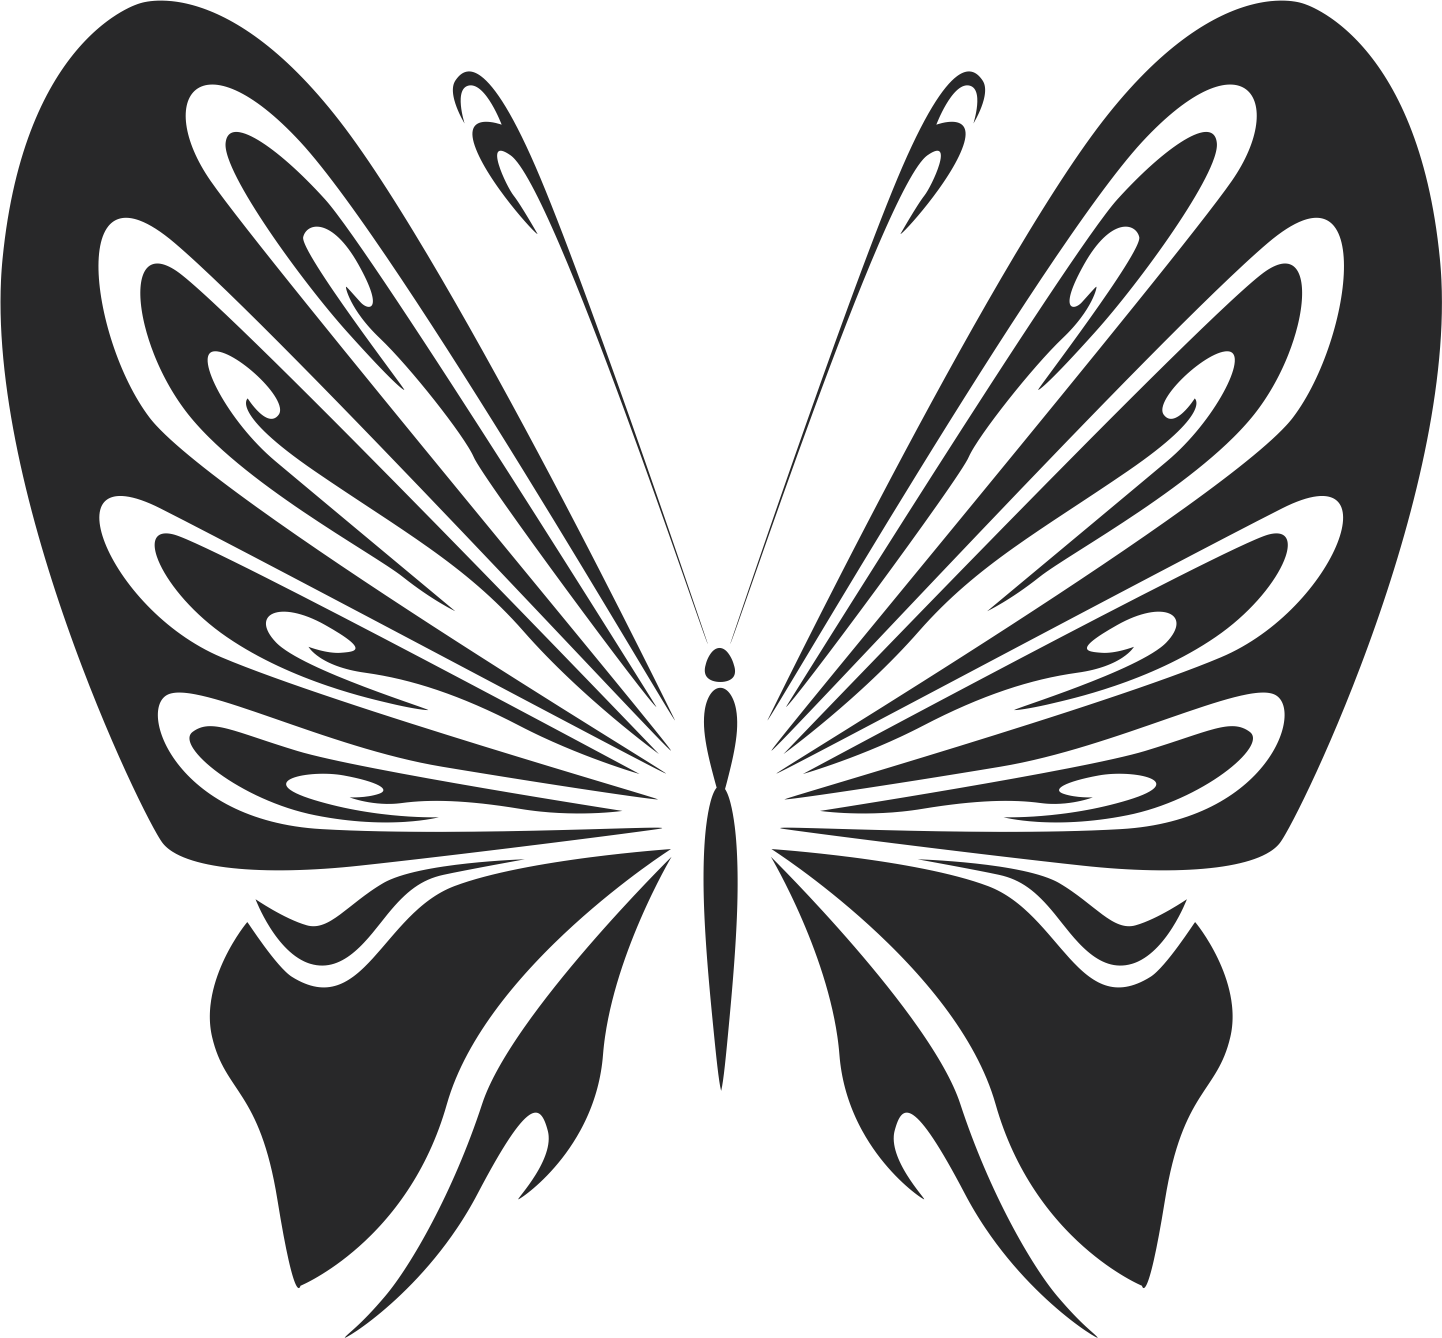 vintage butterfly stencils free vector cdr download 3axisco